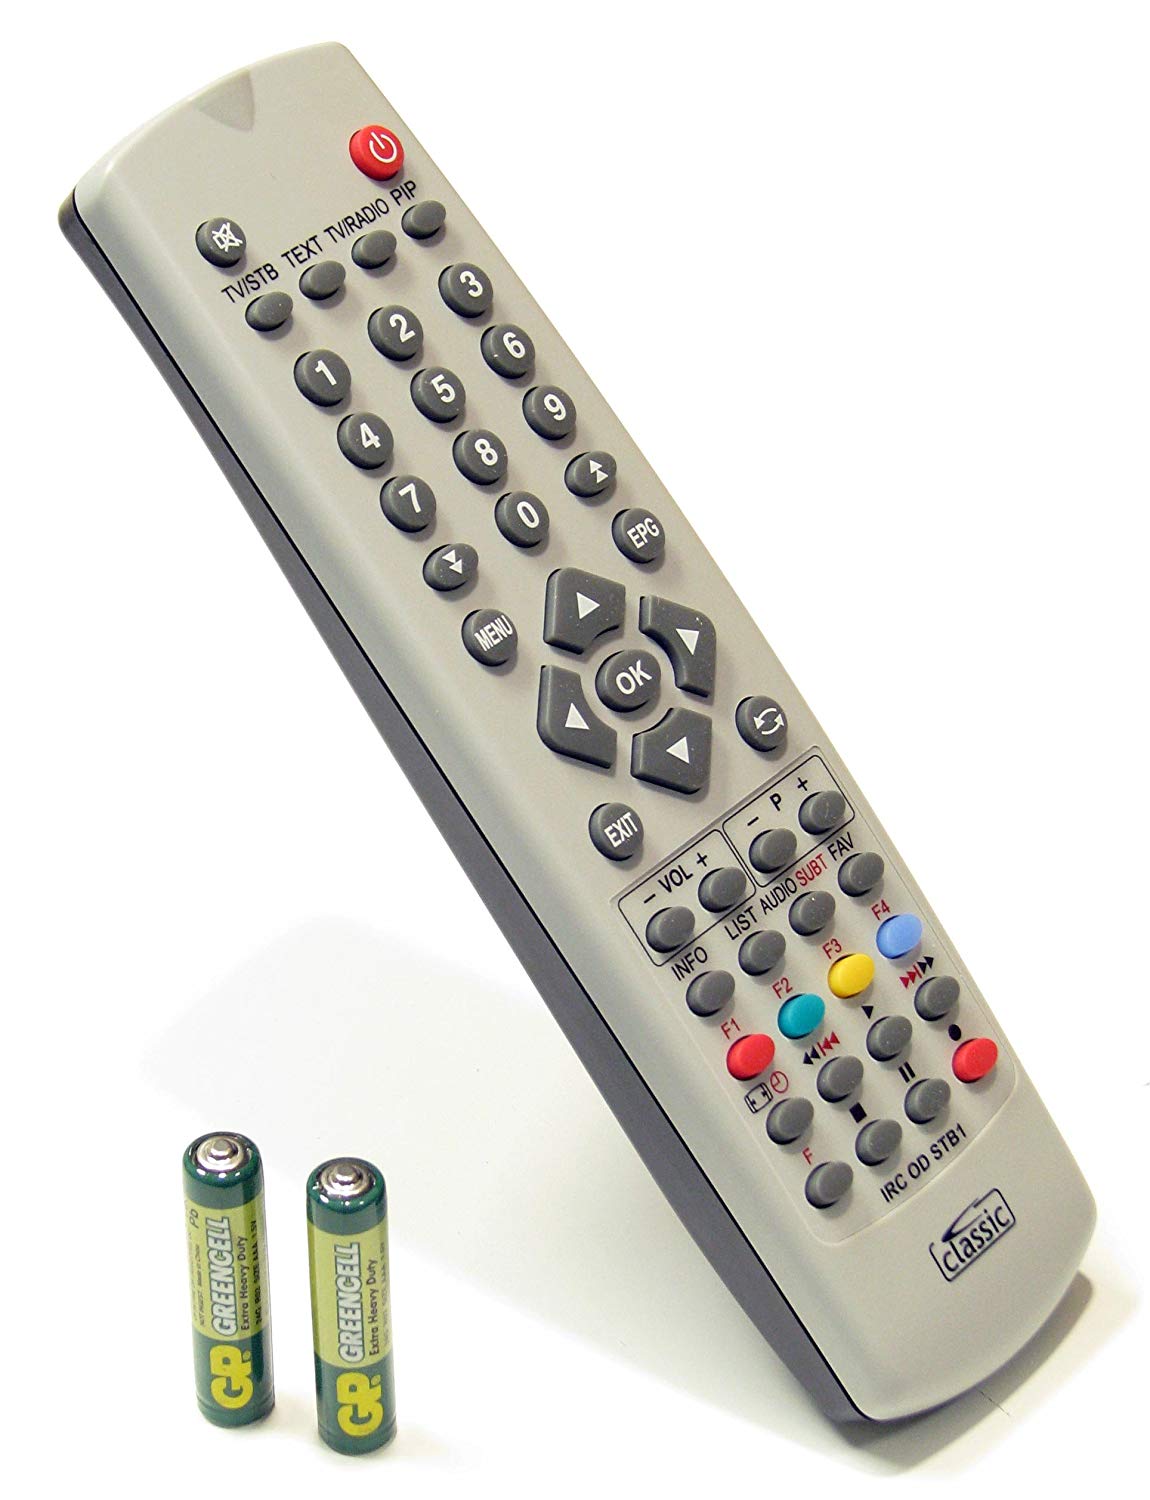 Electric Fireplace Remote Control Replacement Unique Replacement Remote Control for Humax Hdr 1000s 500gb Batteries Included